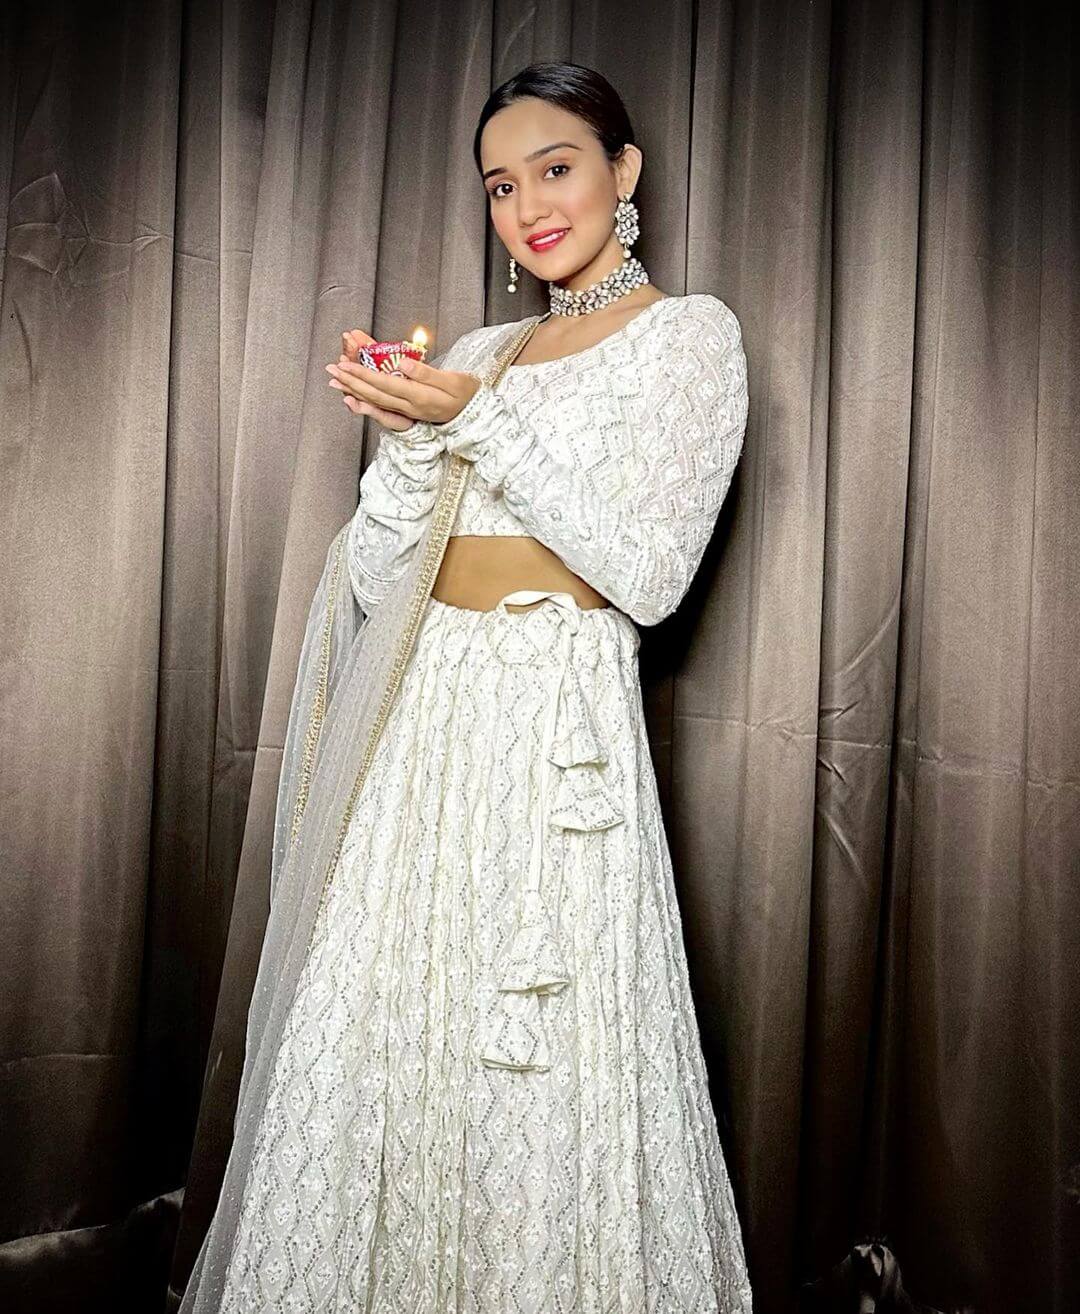 Ashi Singh Look Graceful In White Chikankari Lehenga Outfit Ashi Singh Fabulous Outfit and Style